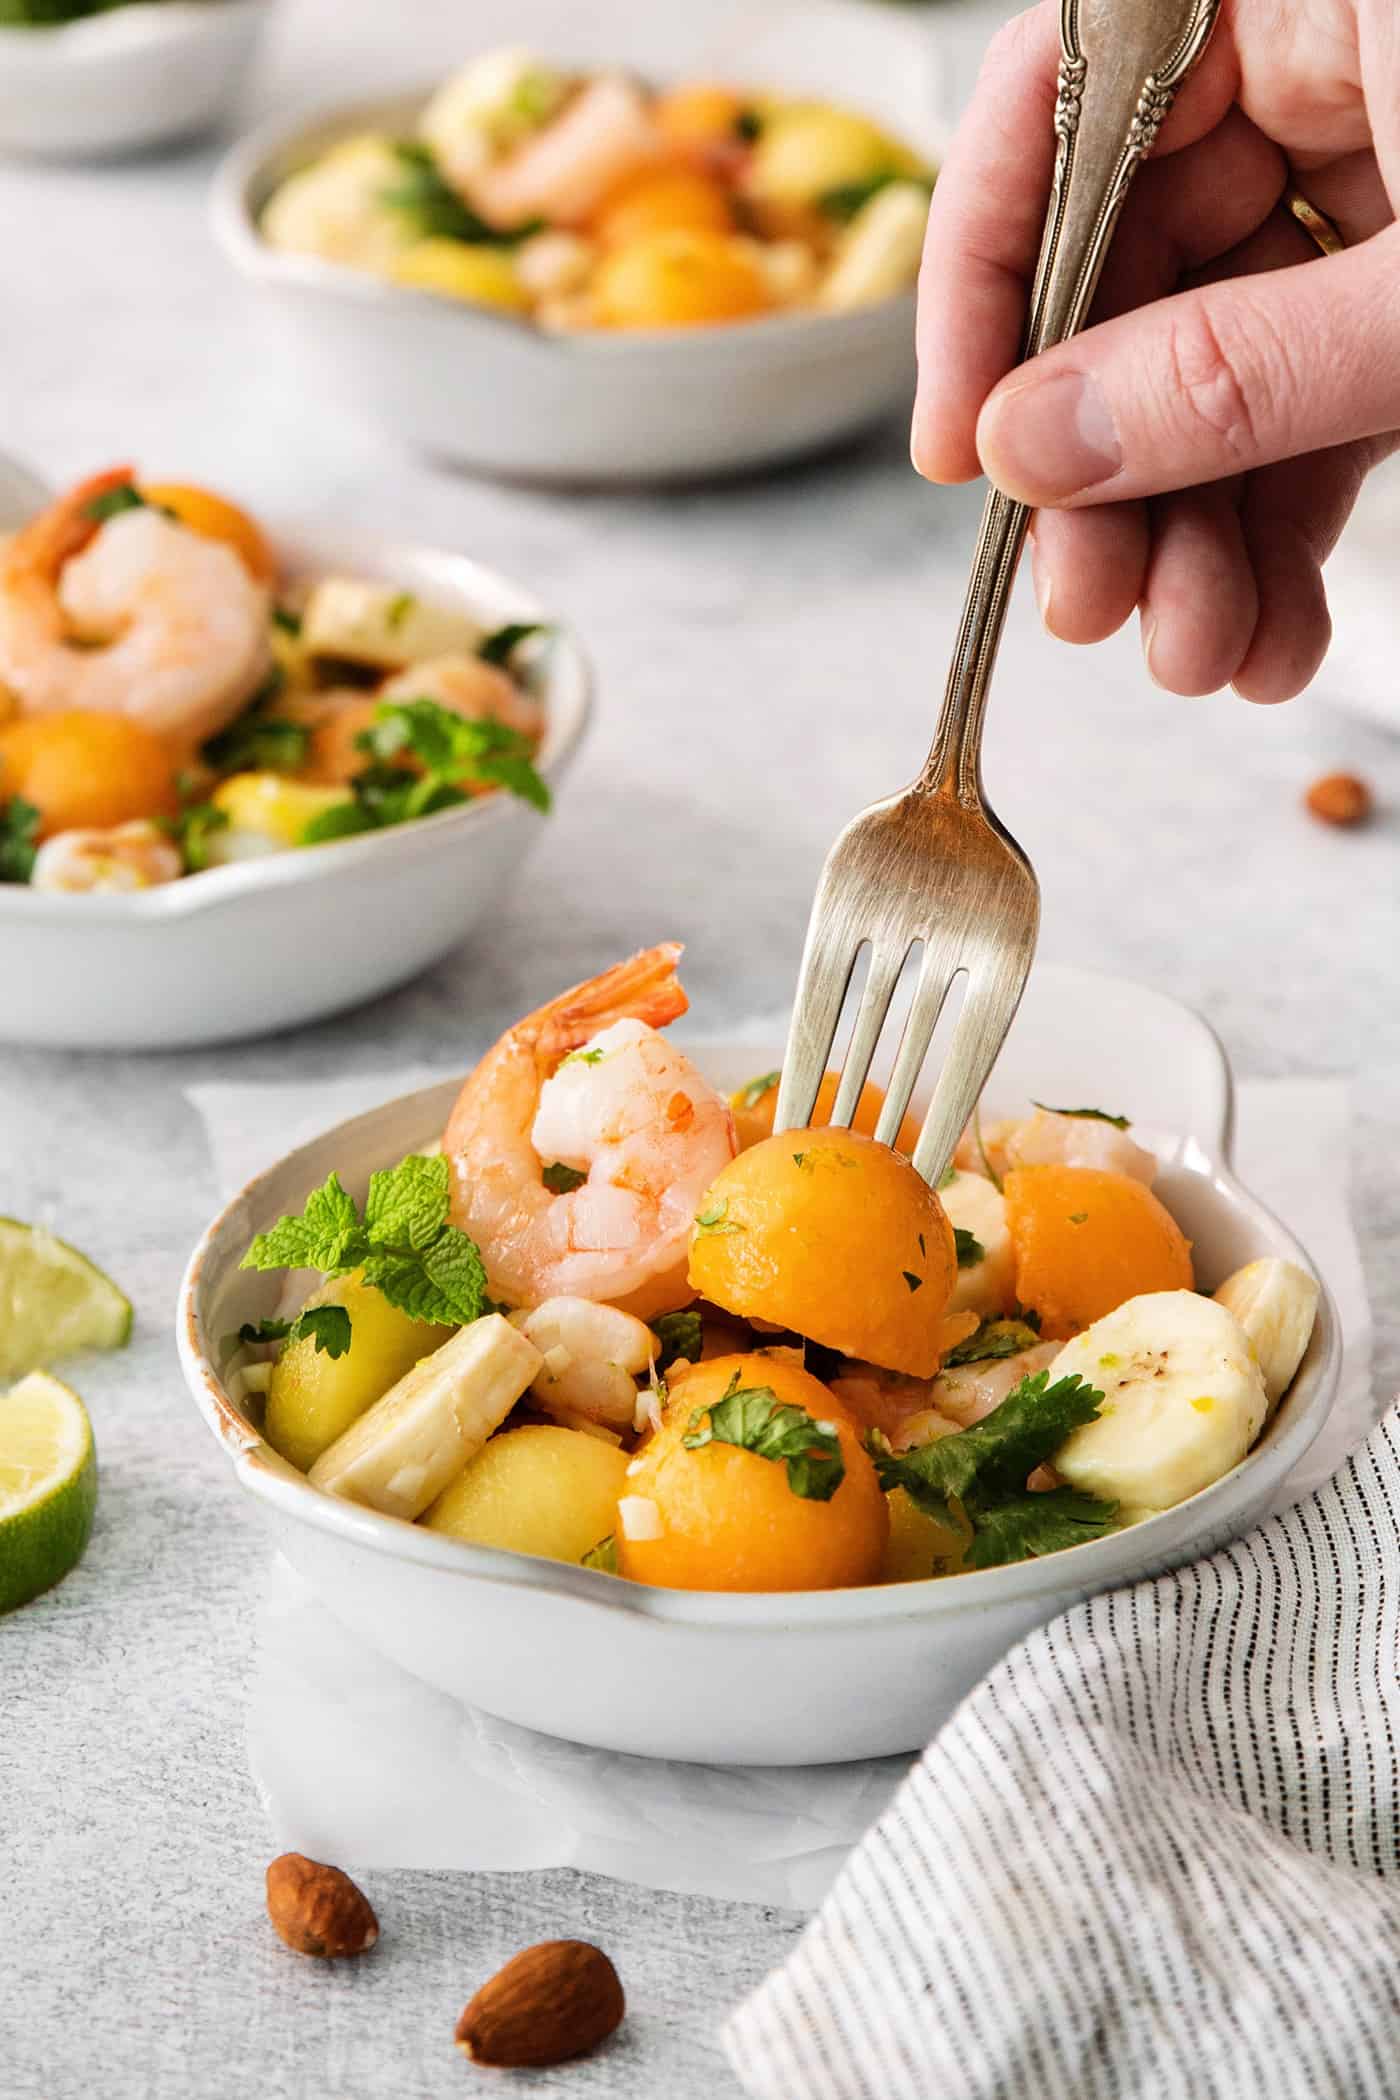 A hand holding a fork picks up a piece of melon out of a bowl of tropical shrimp salad with another bowl of salad shown in the background.